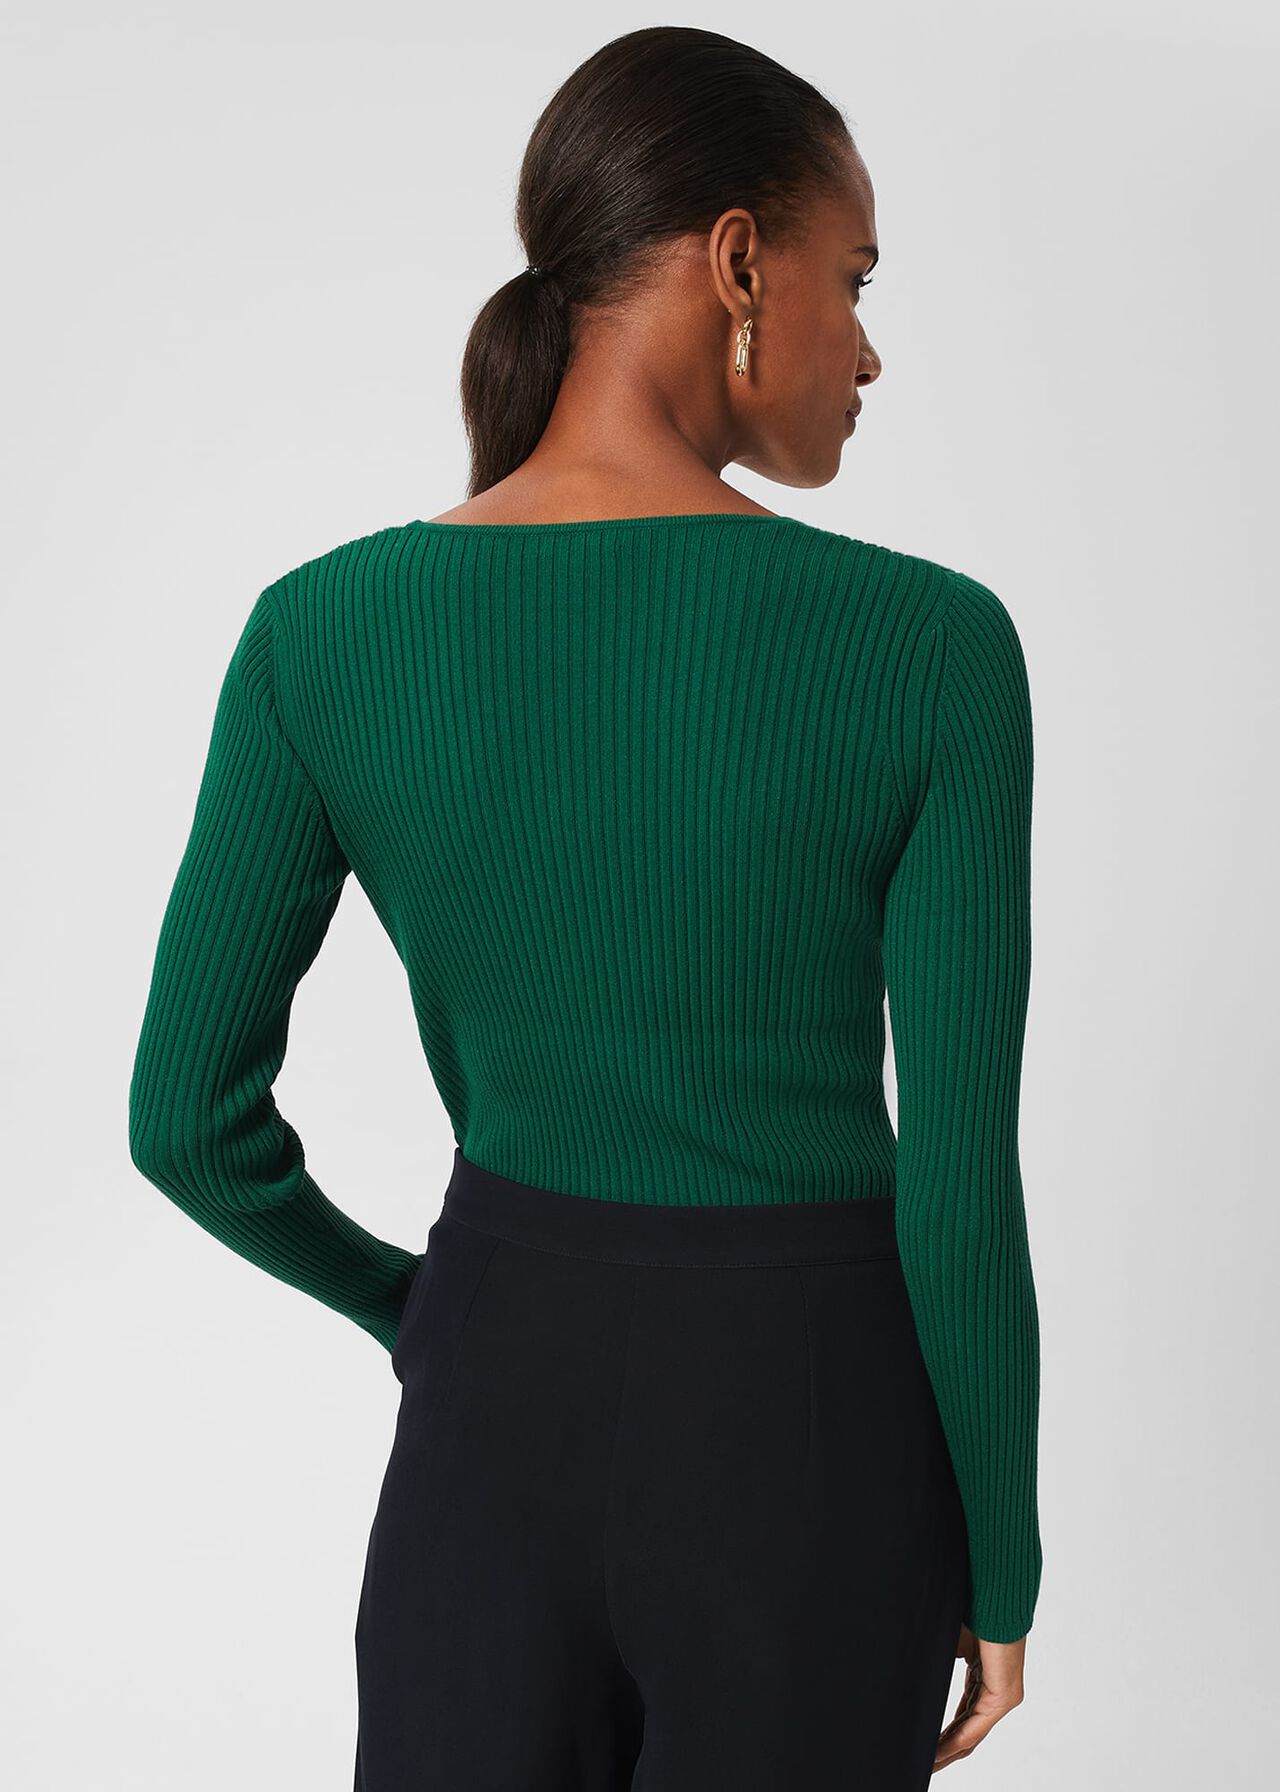 Bethan Knitted Top, Evergreen, hi-res